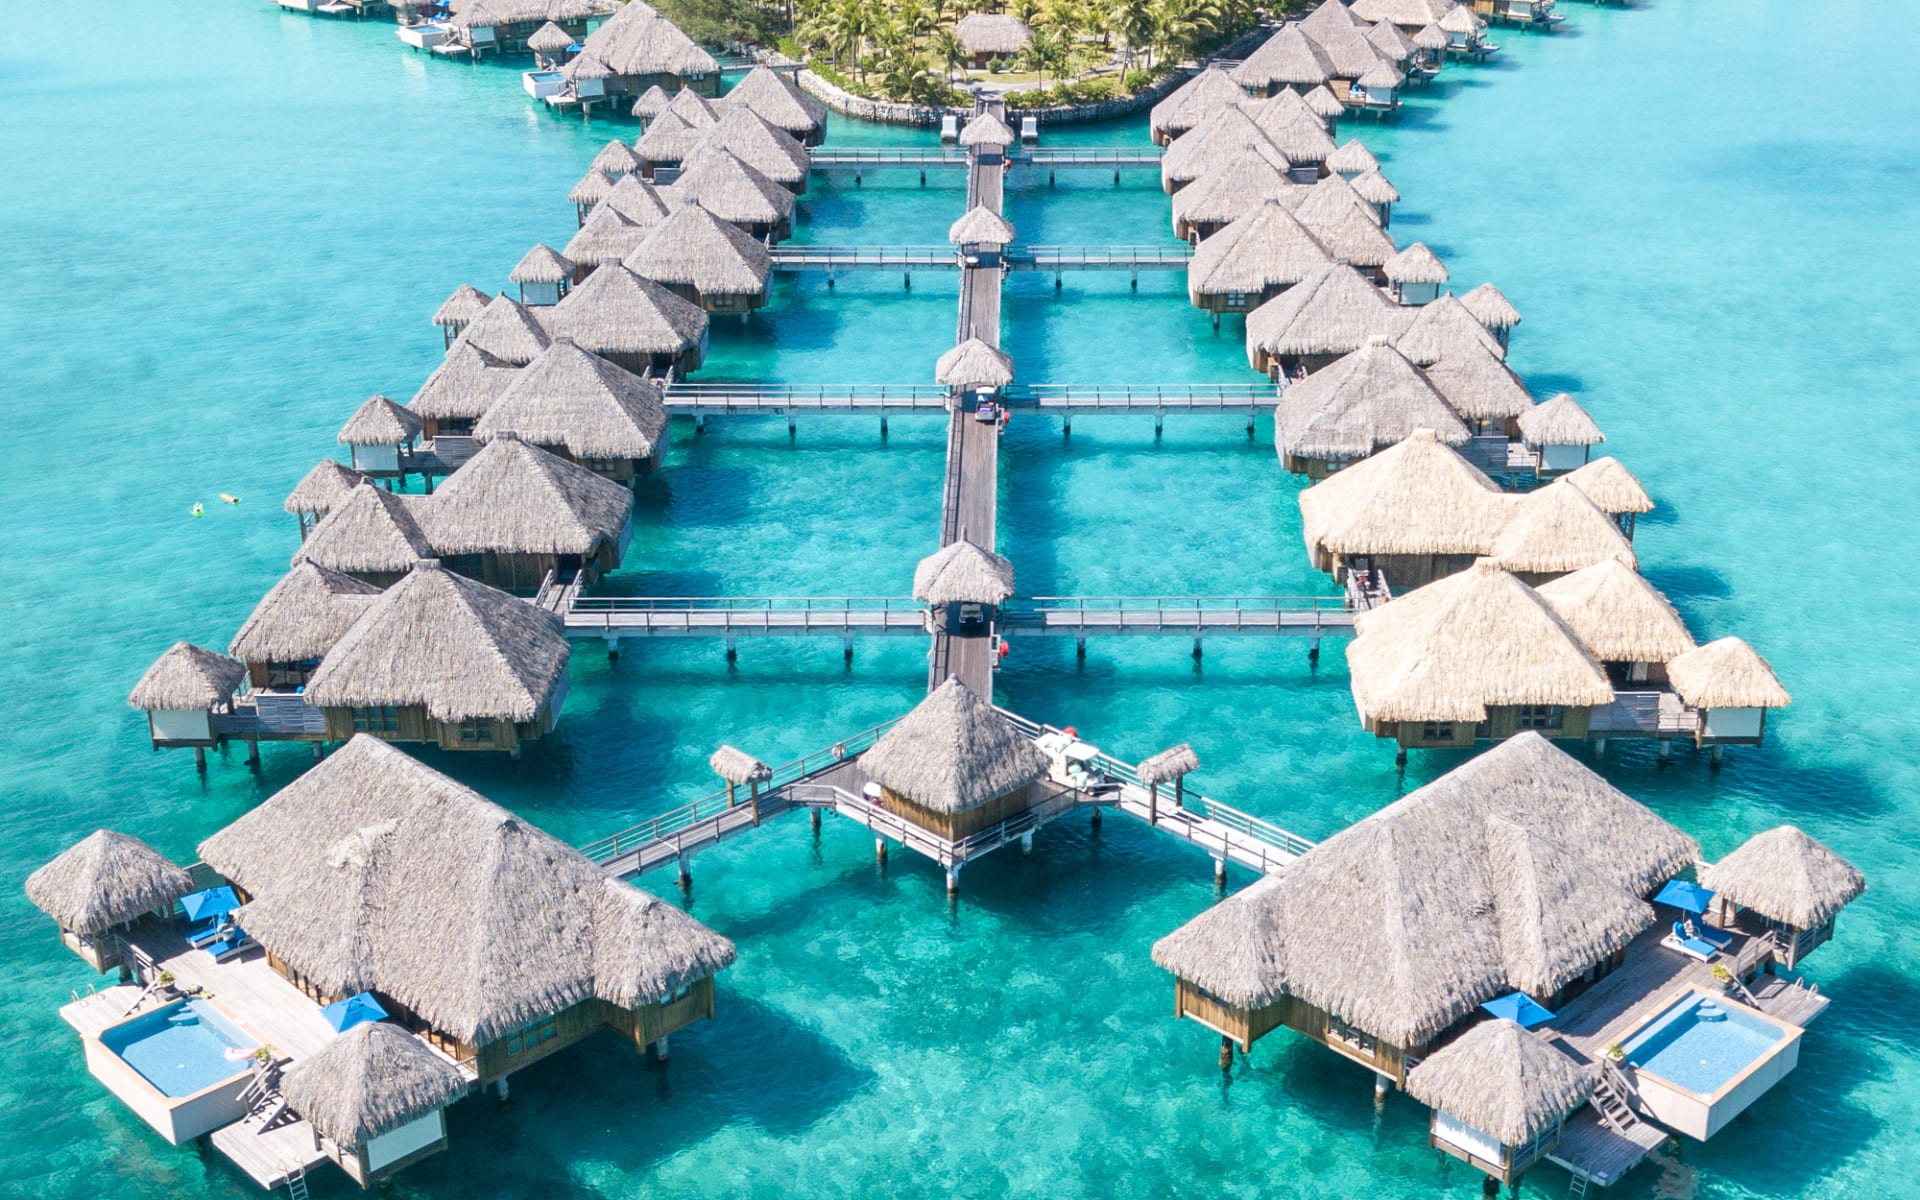 Ariel view of overwater bungalows